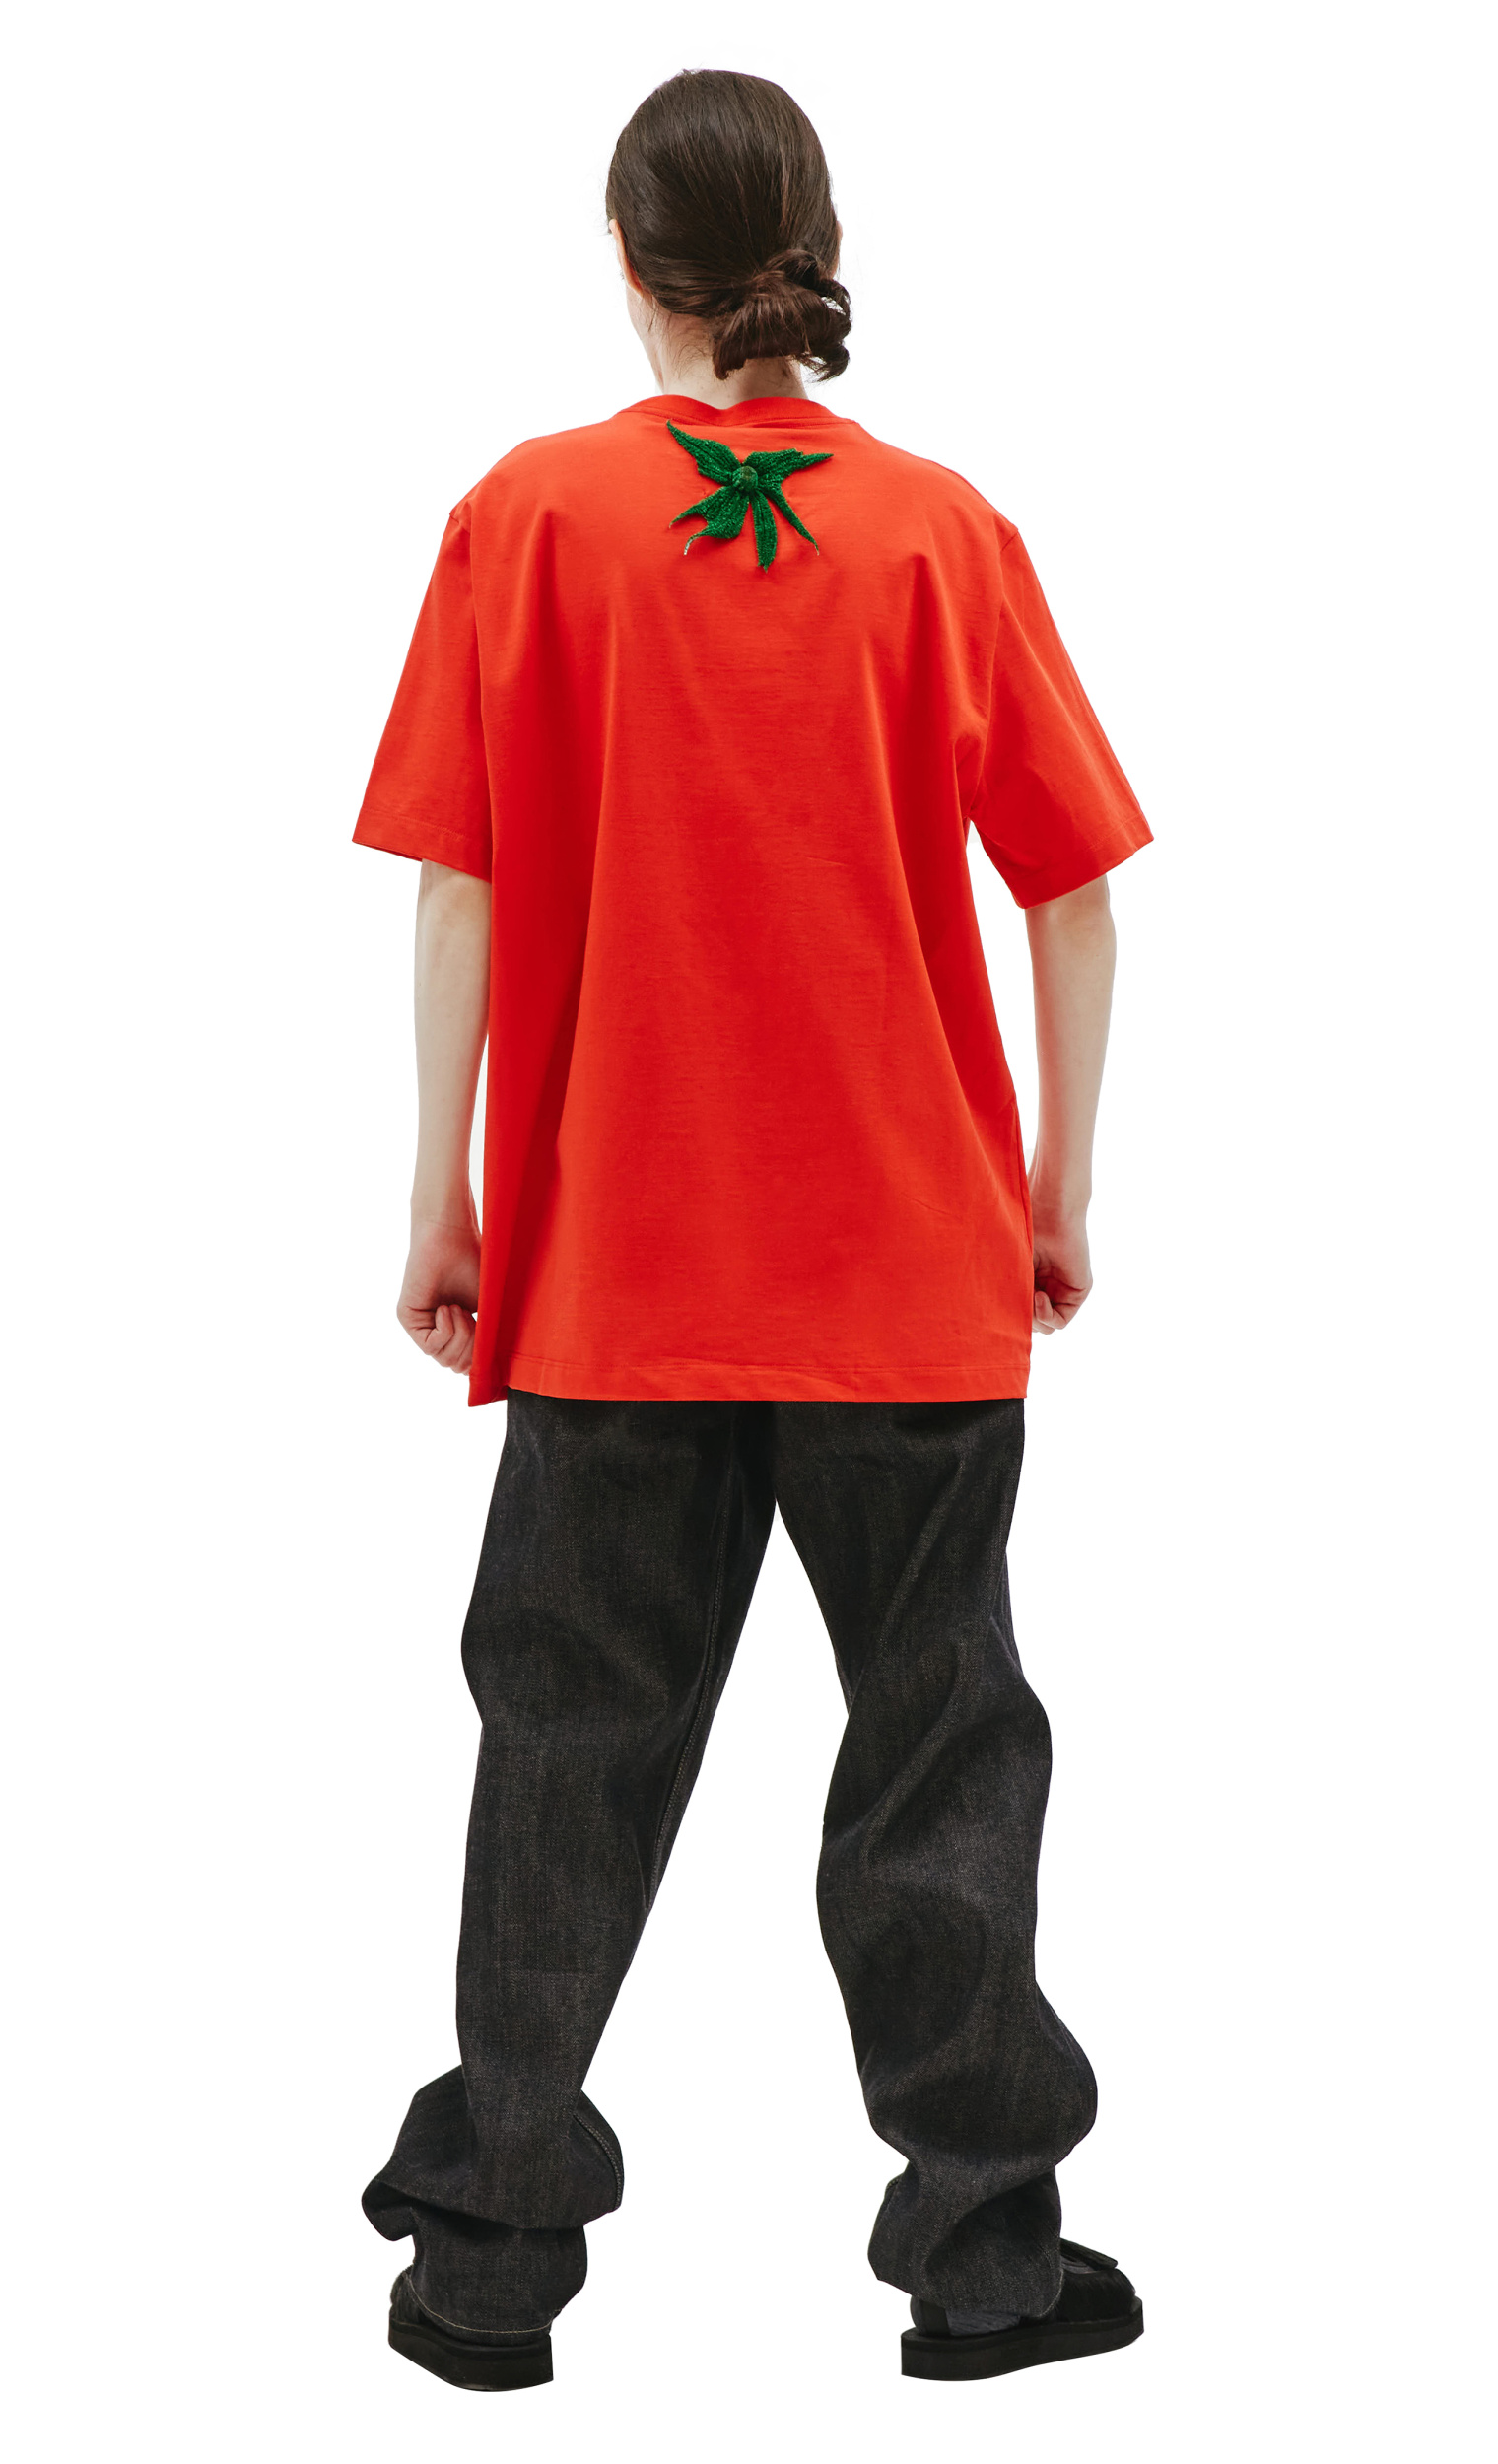 Doublet Embroidery tomato t-shirt